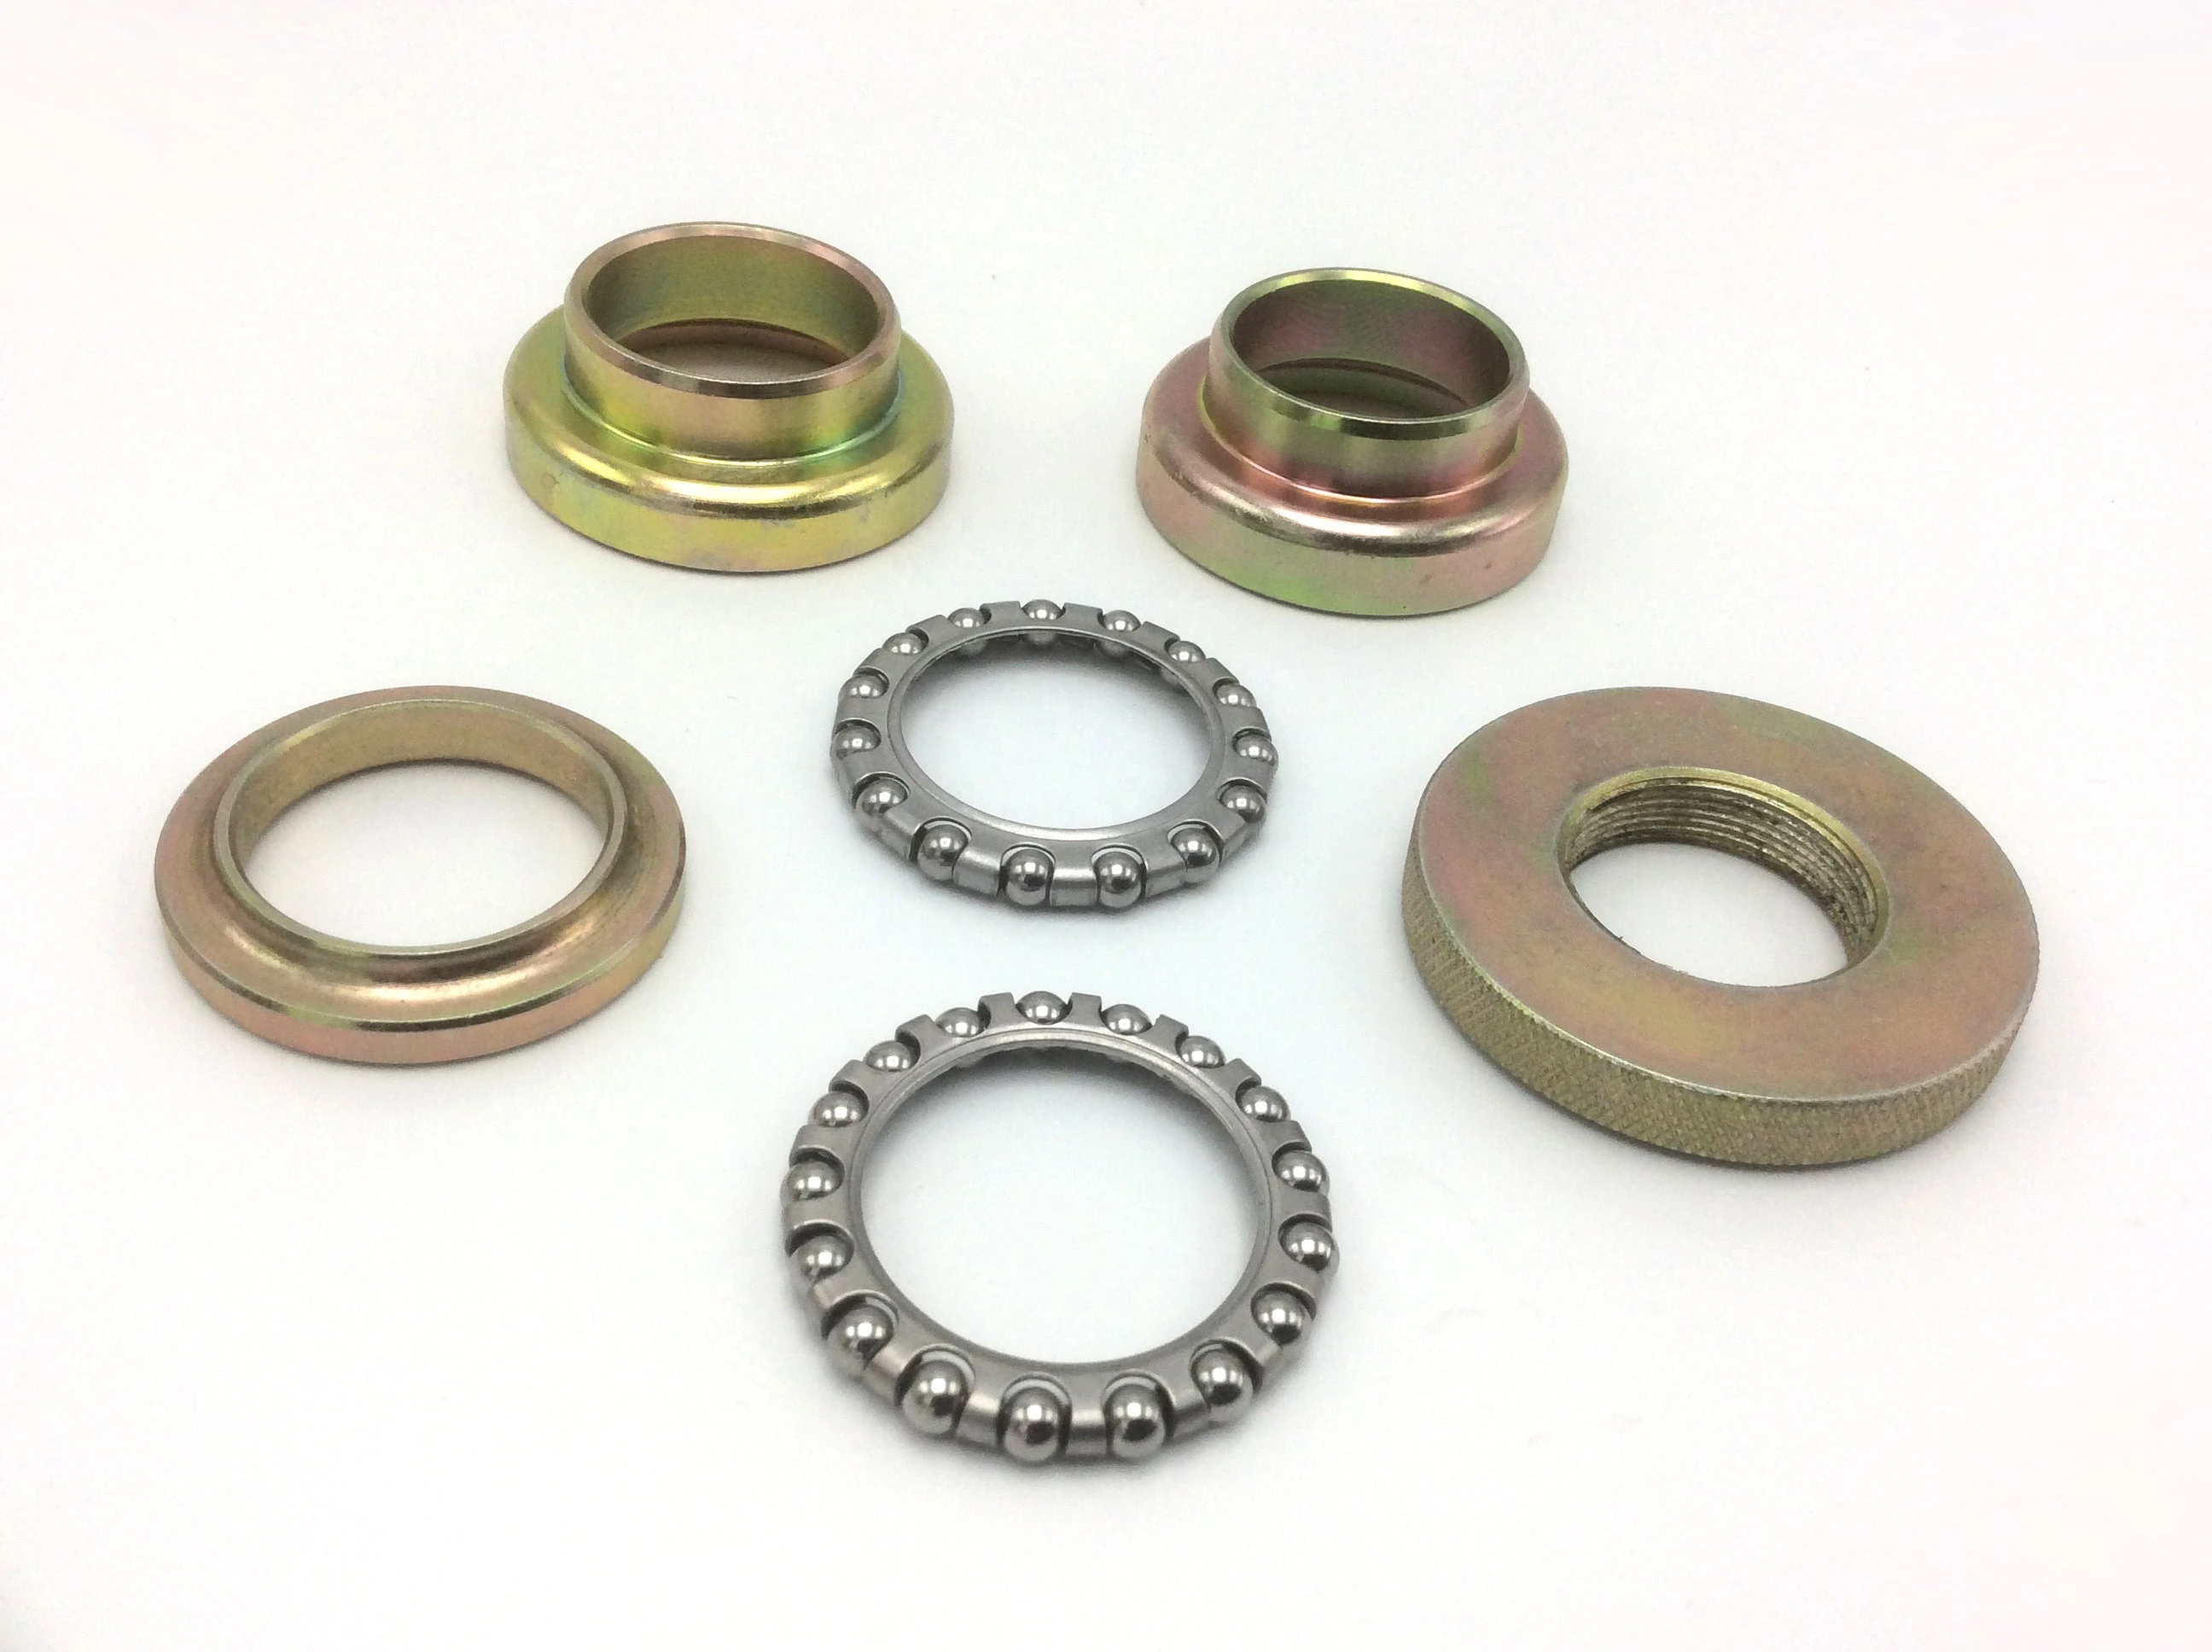 Sales RTS Steering Head Bearings for MBK Ovetto Bws Booster